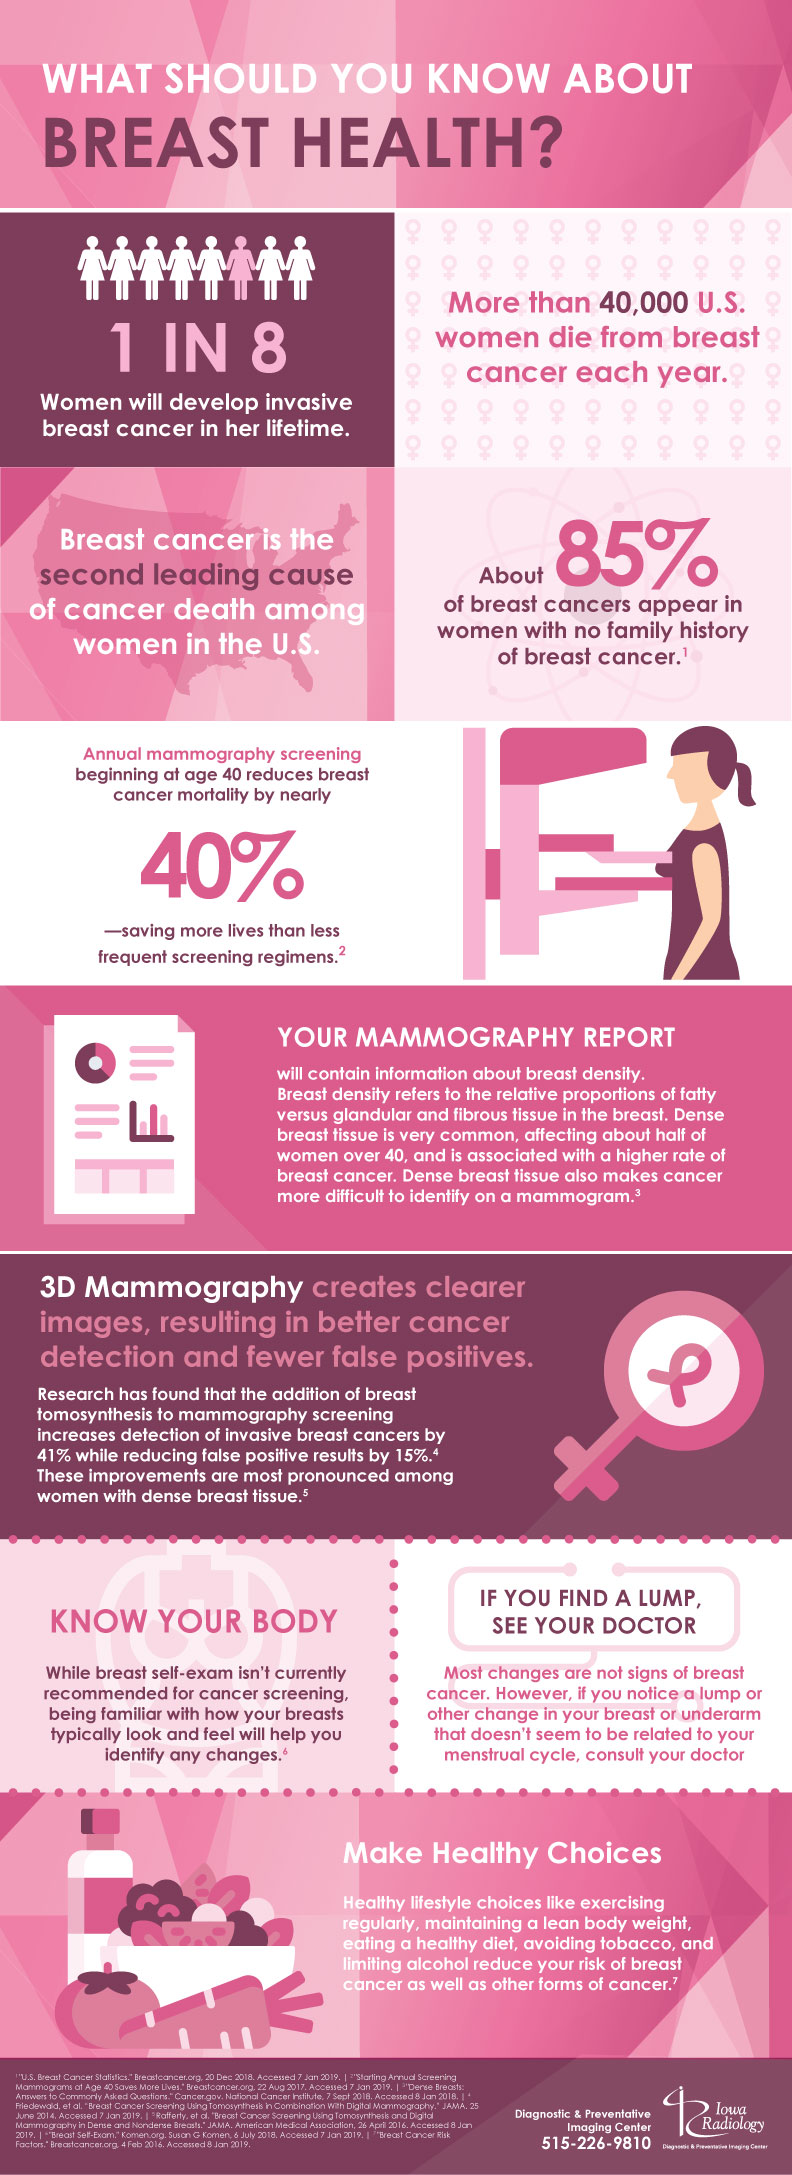 What Should You Know About Breast Health Infographic